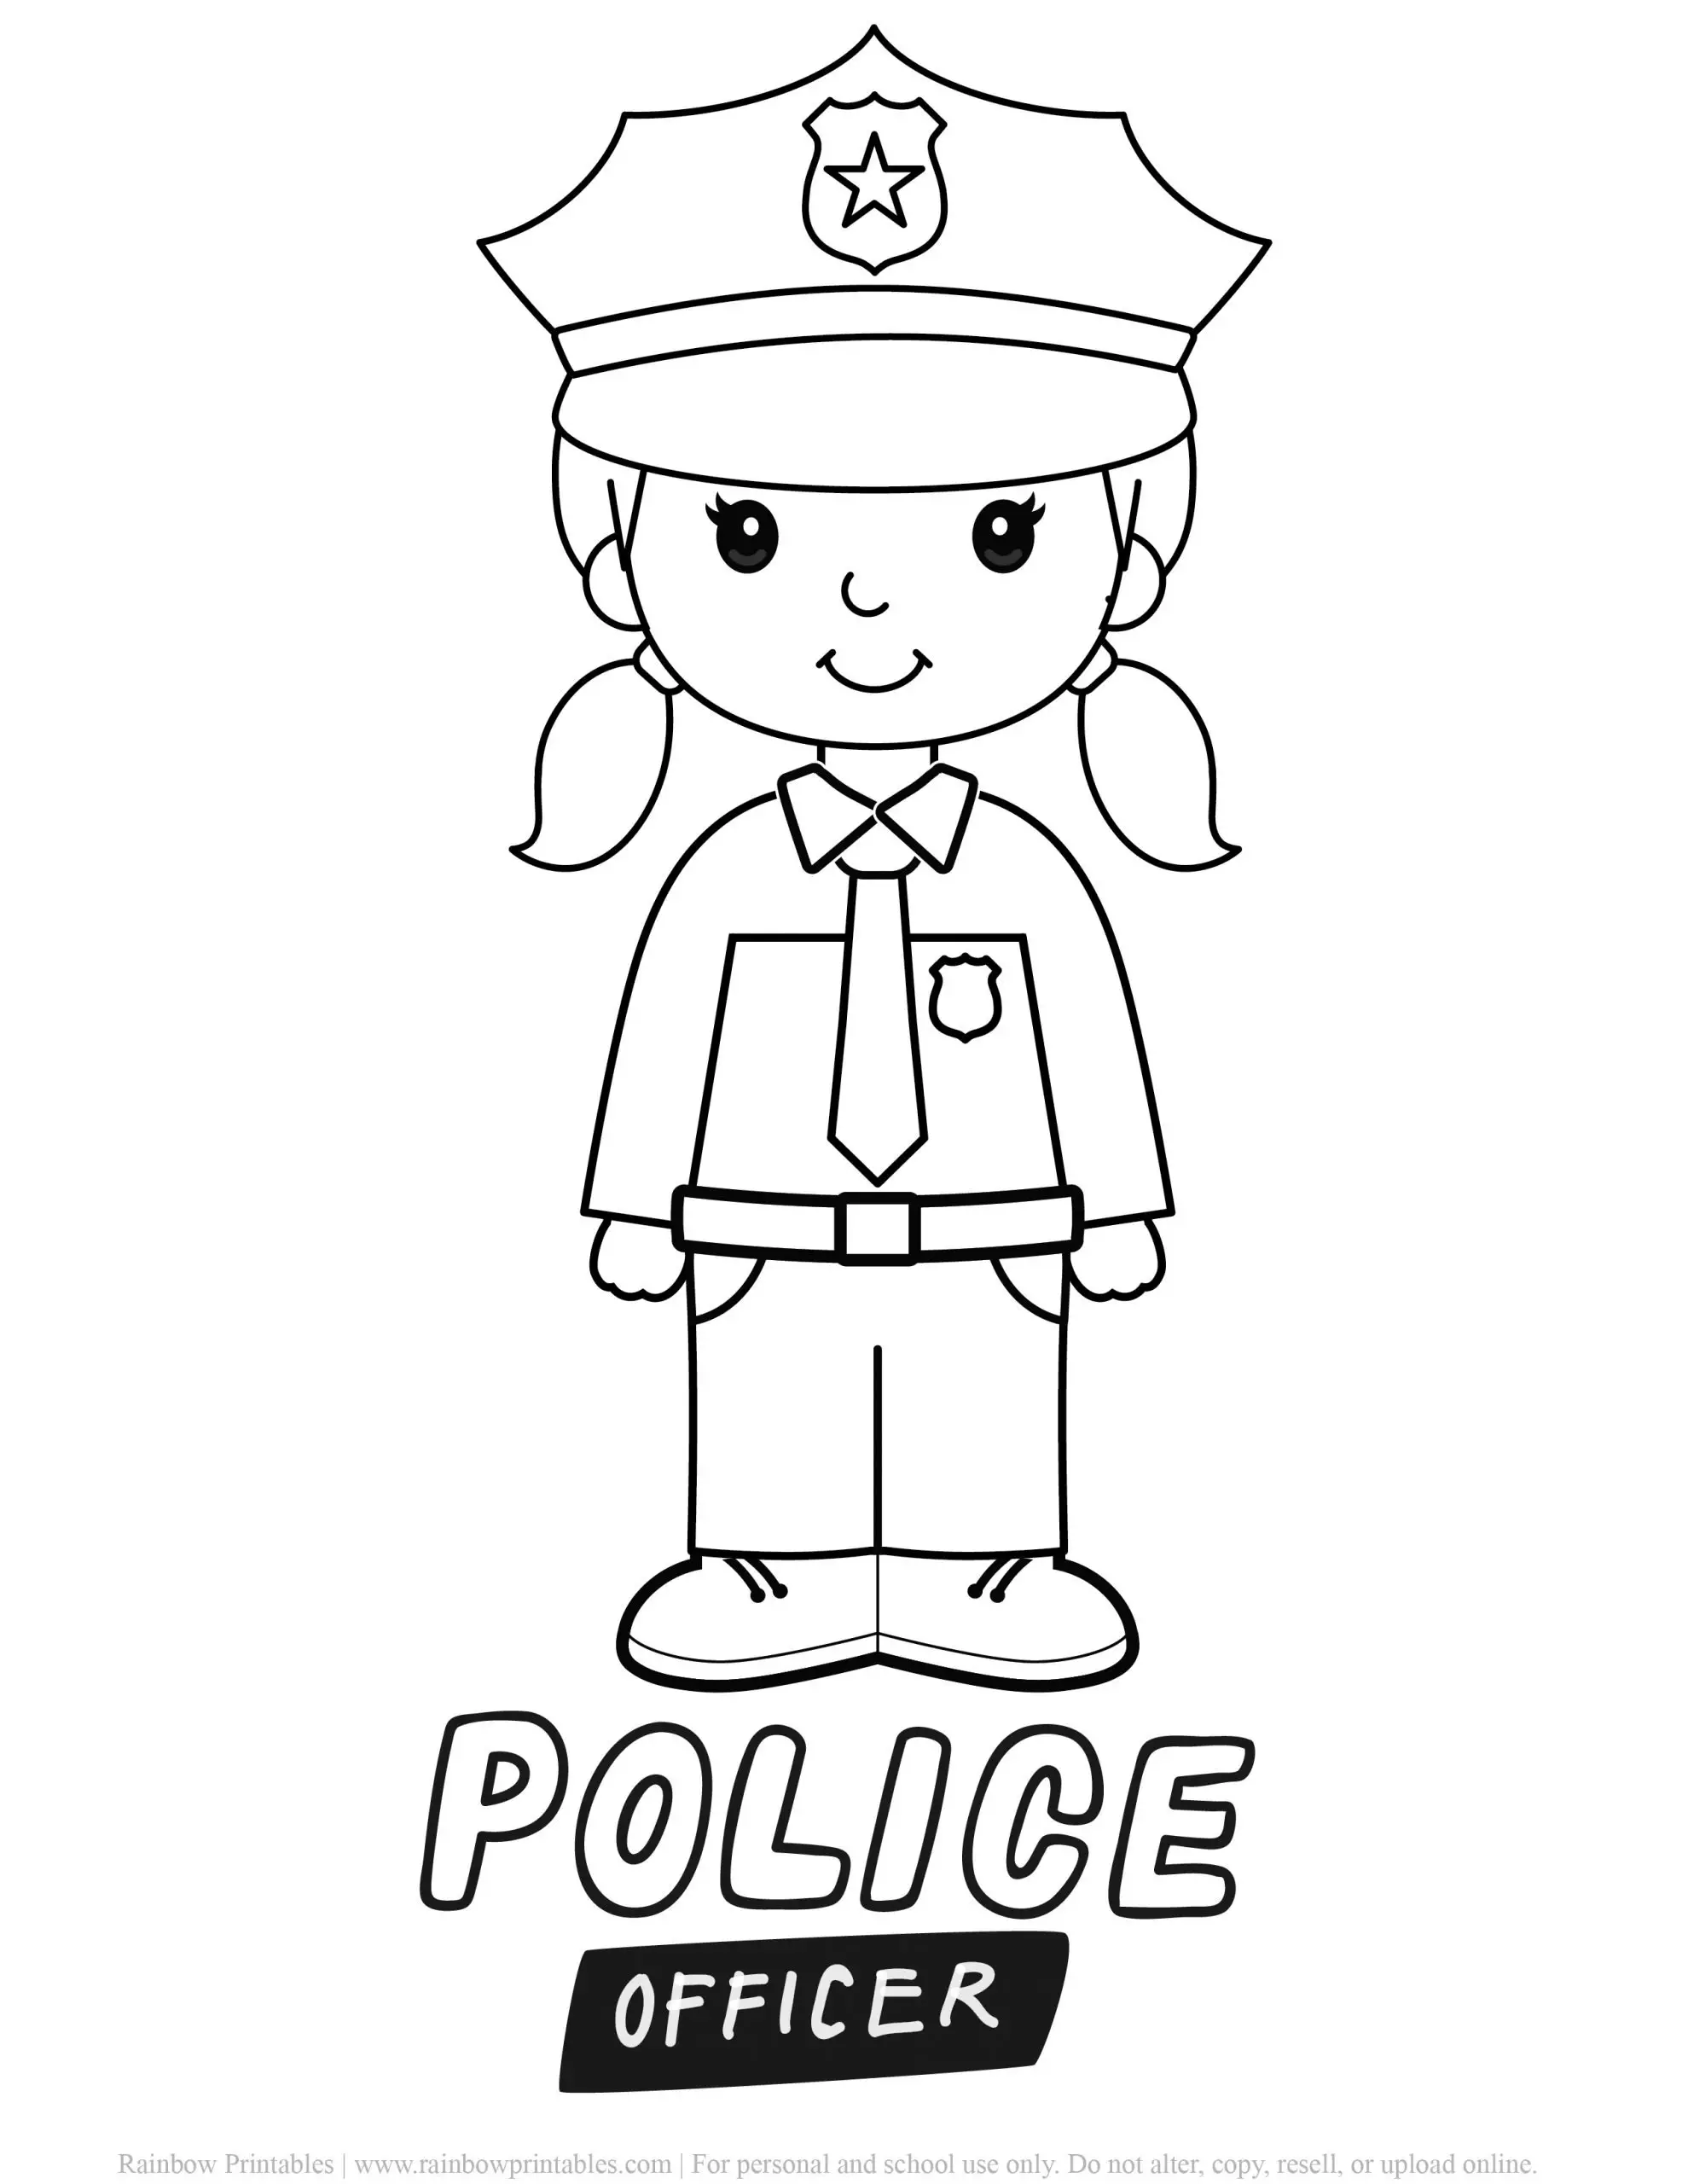 Simple Police Officer Coloring Pages for Kids Rainbow Printables